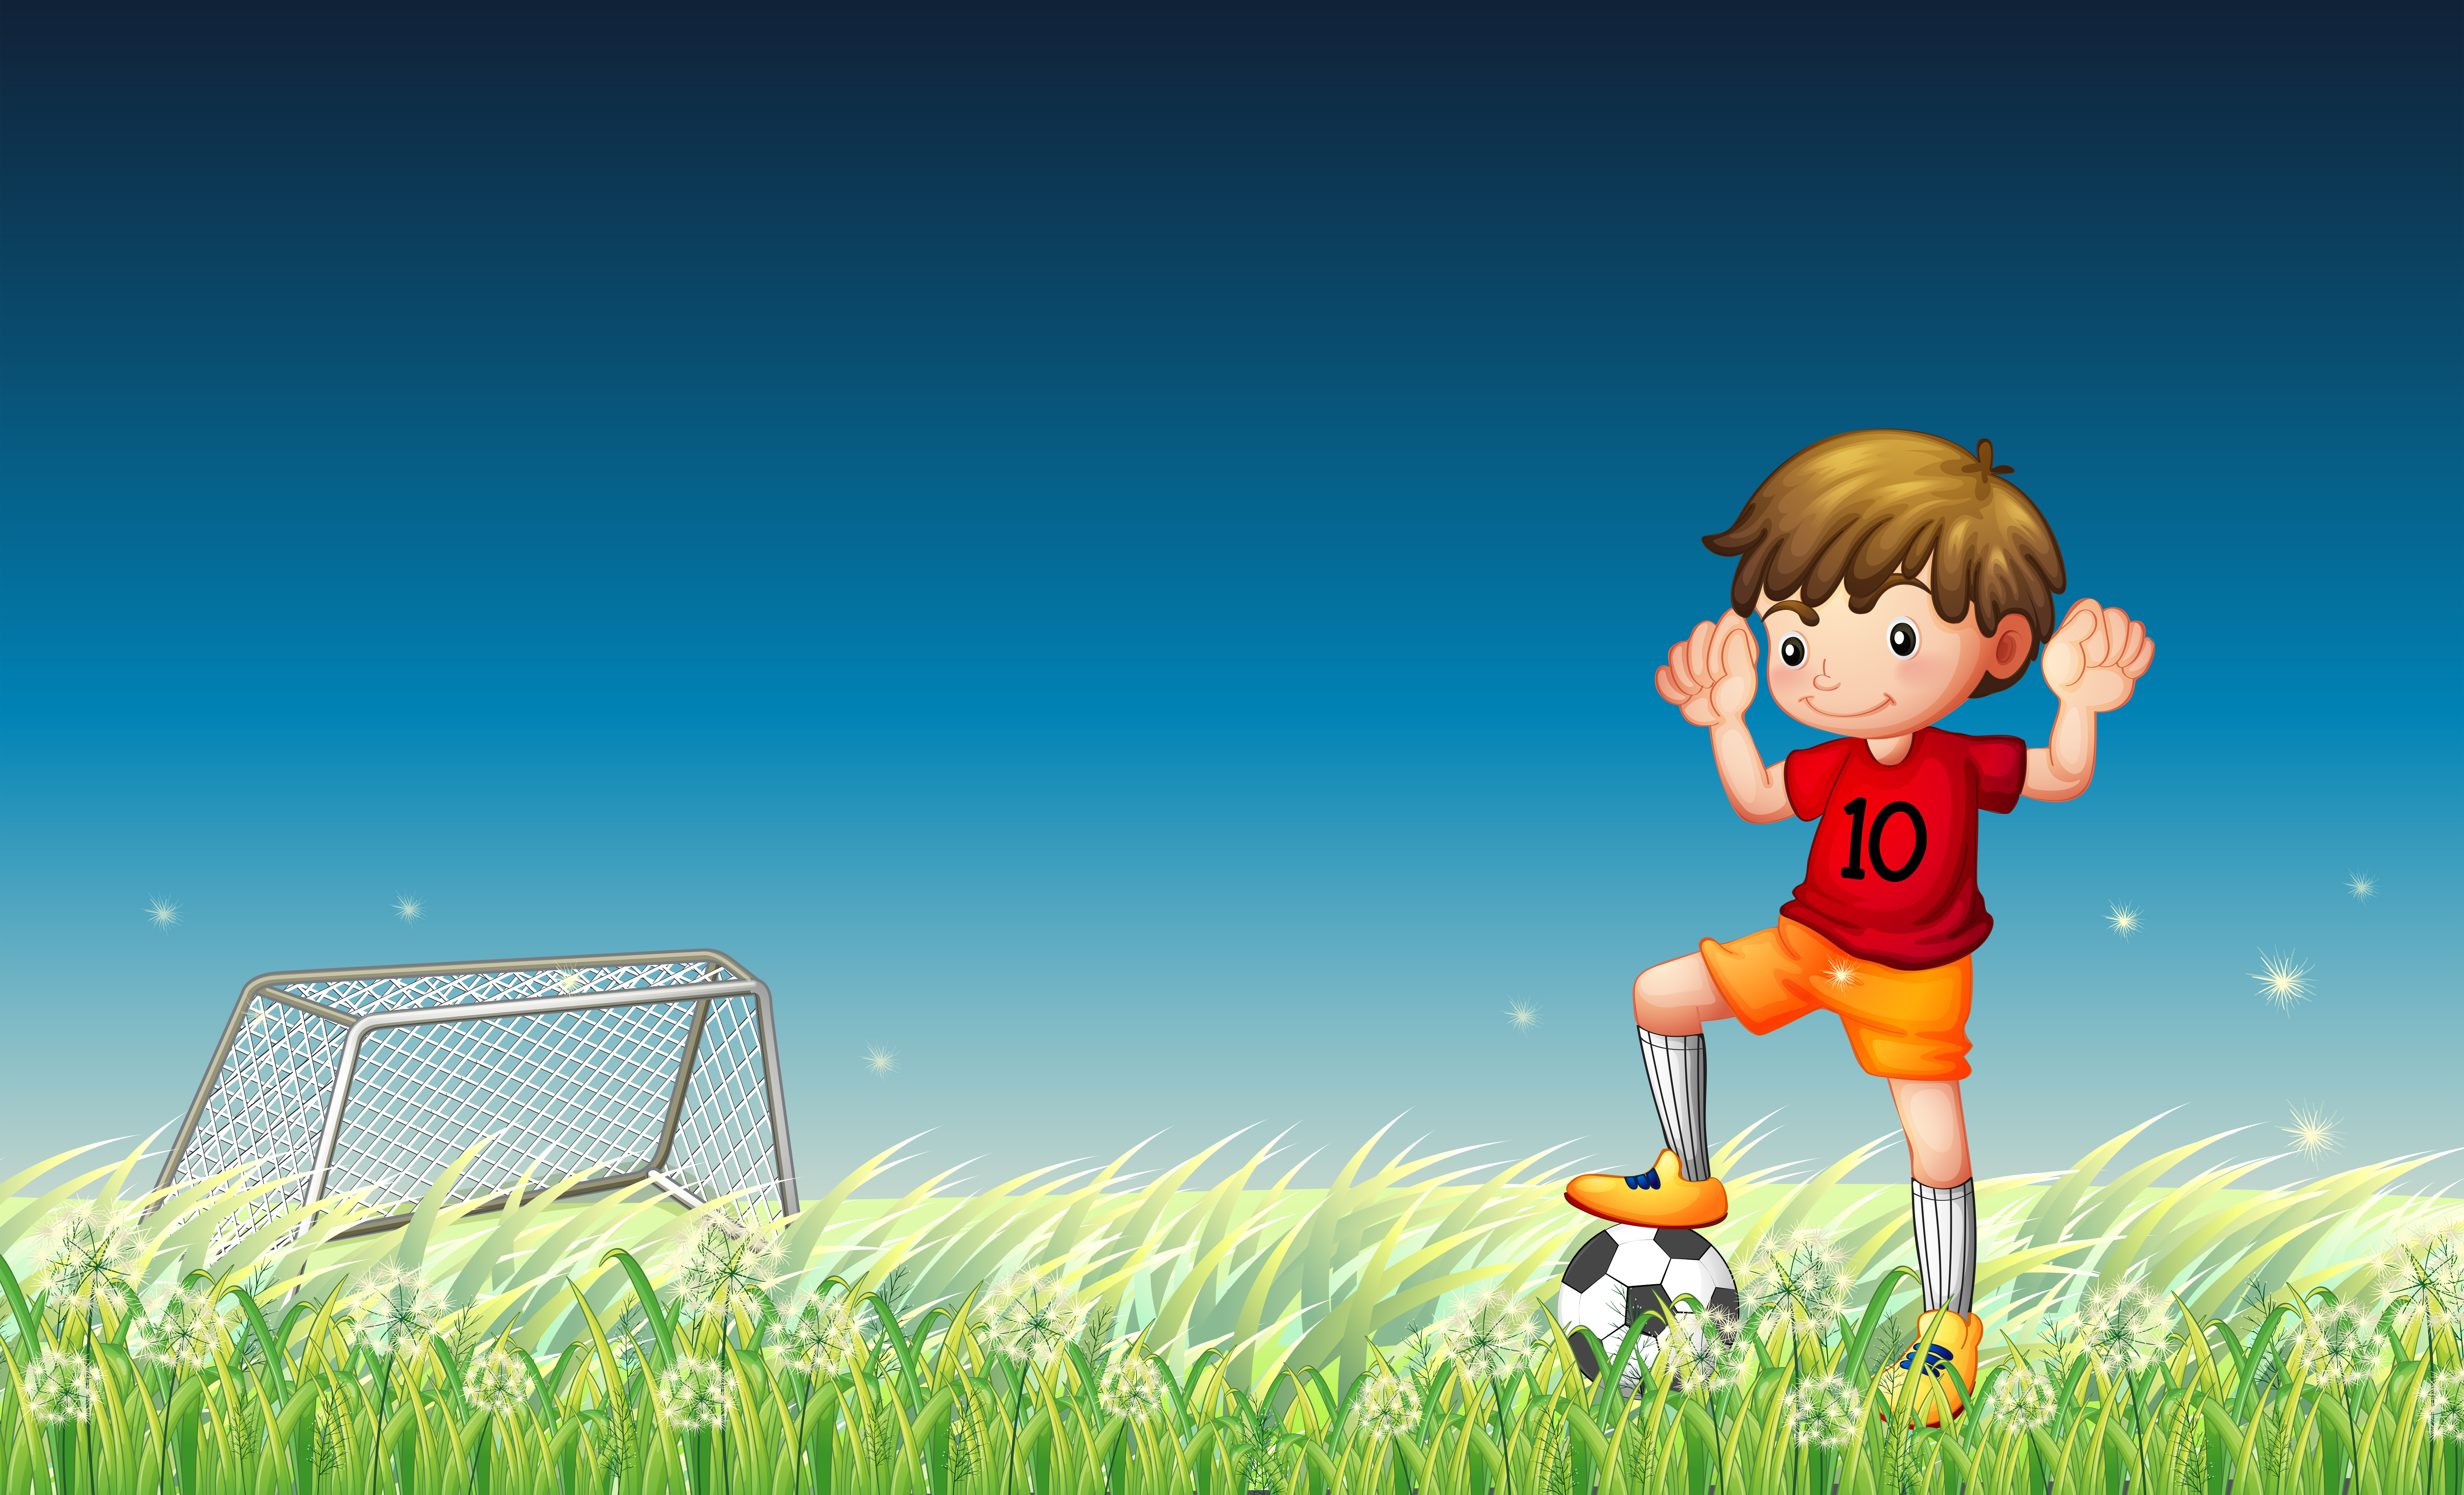 Download A boy playing soccer - Download Free Vectors, Clipart ...